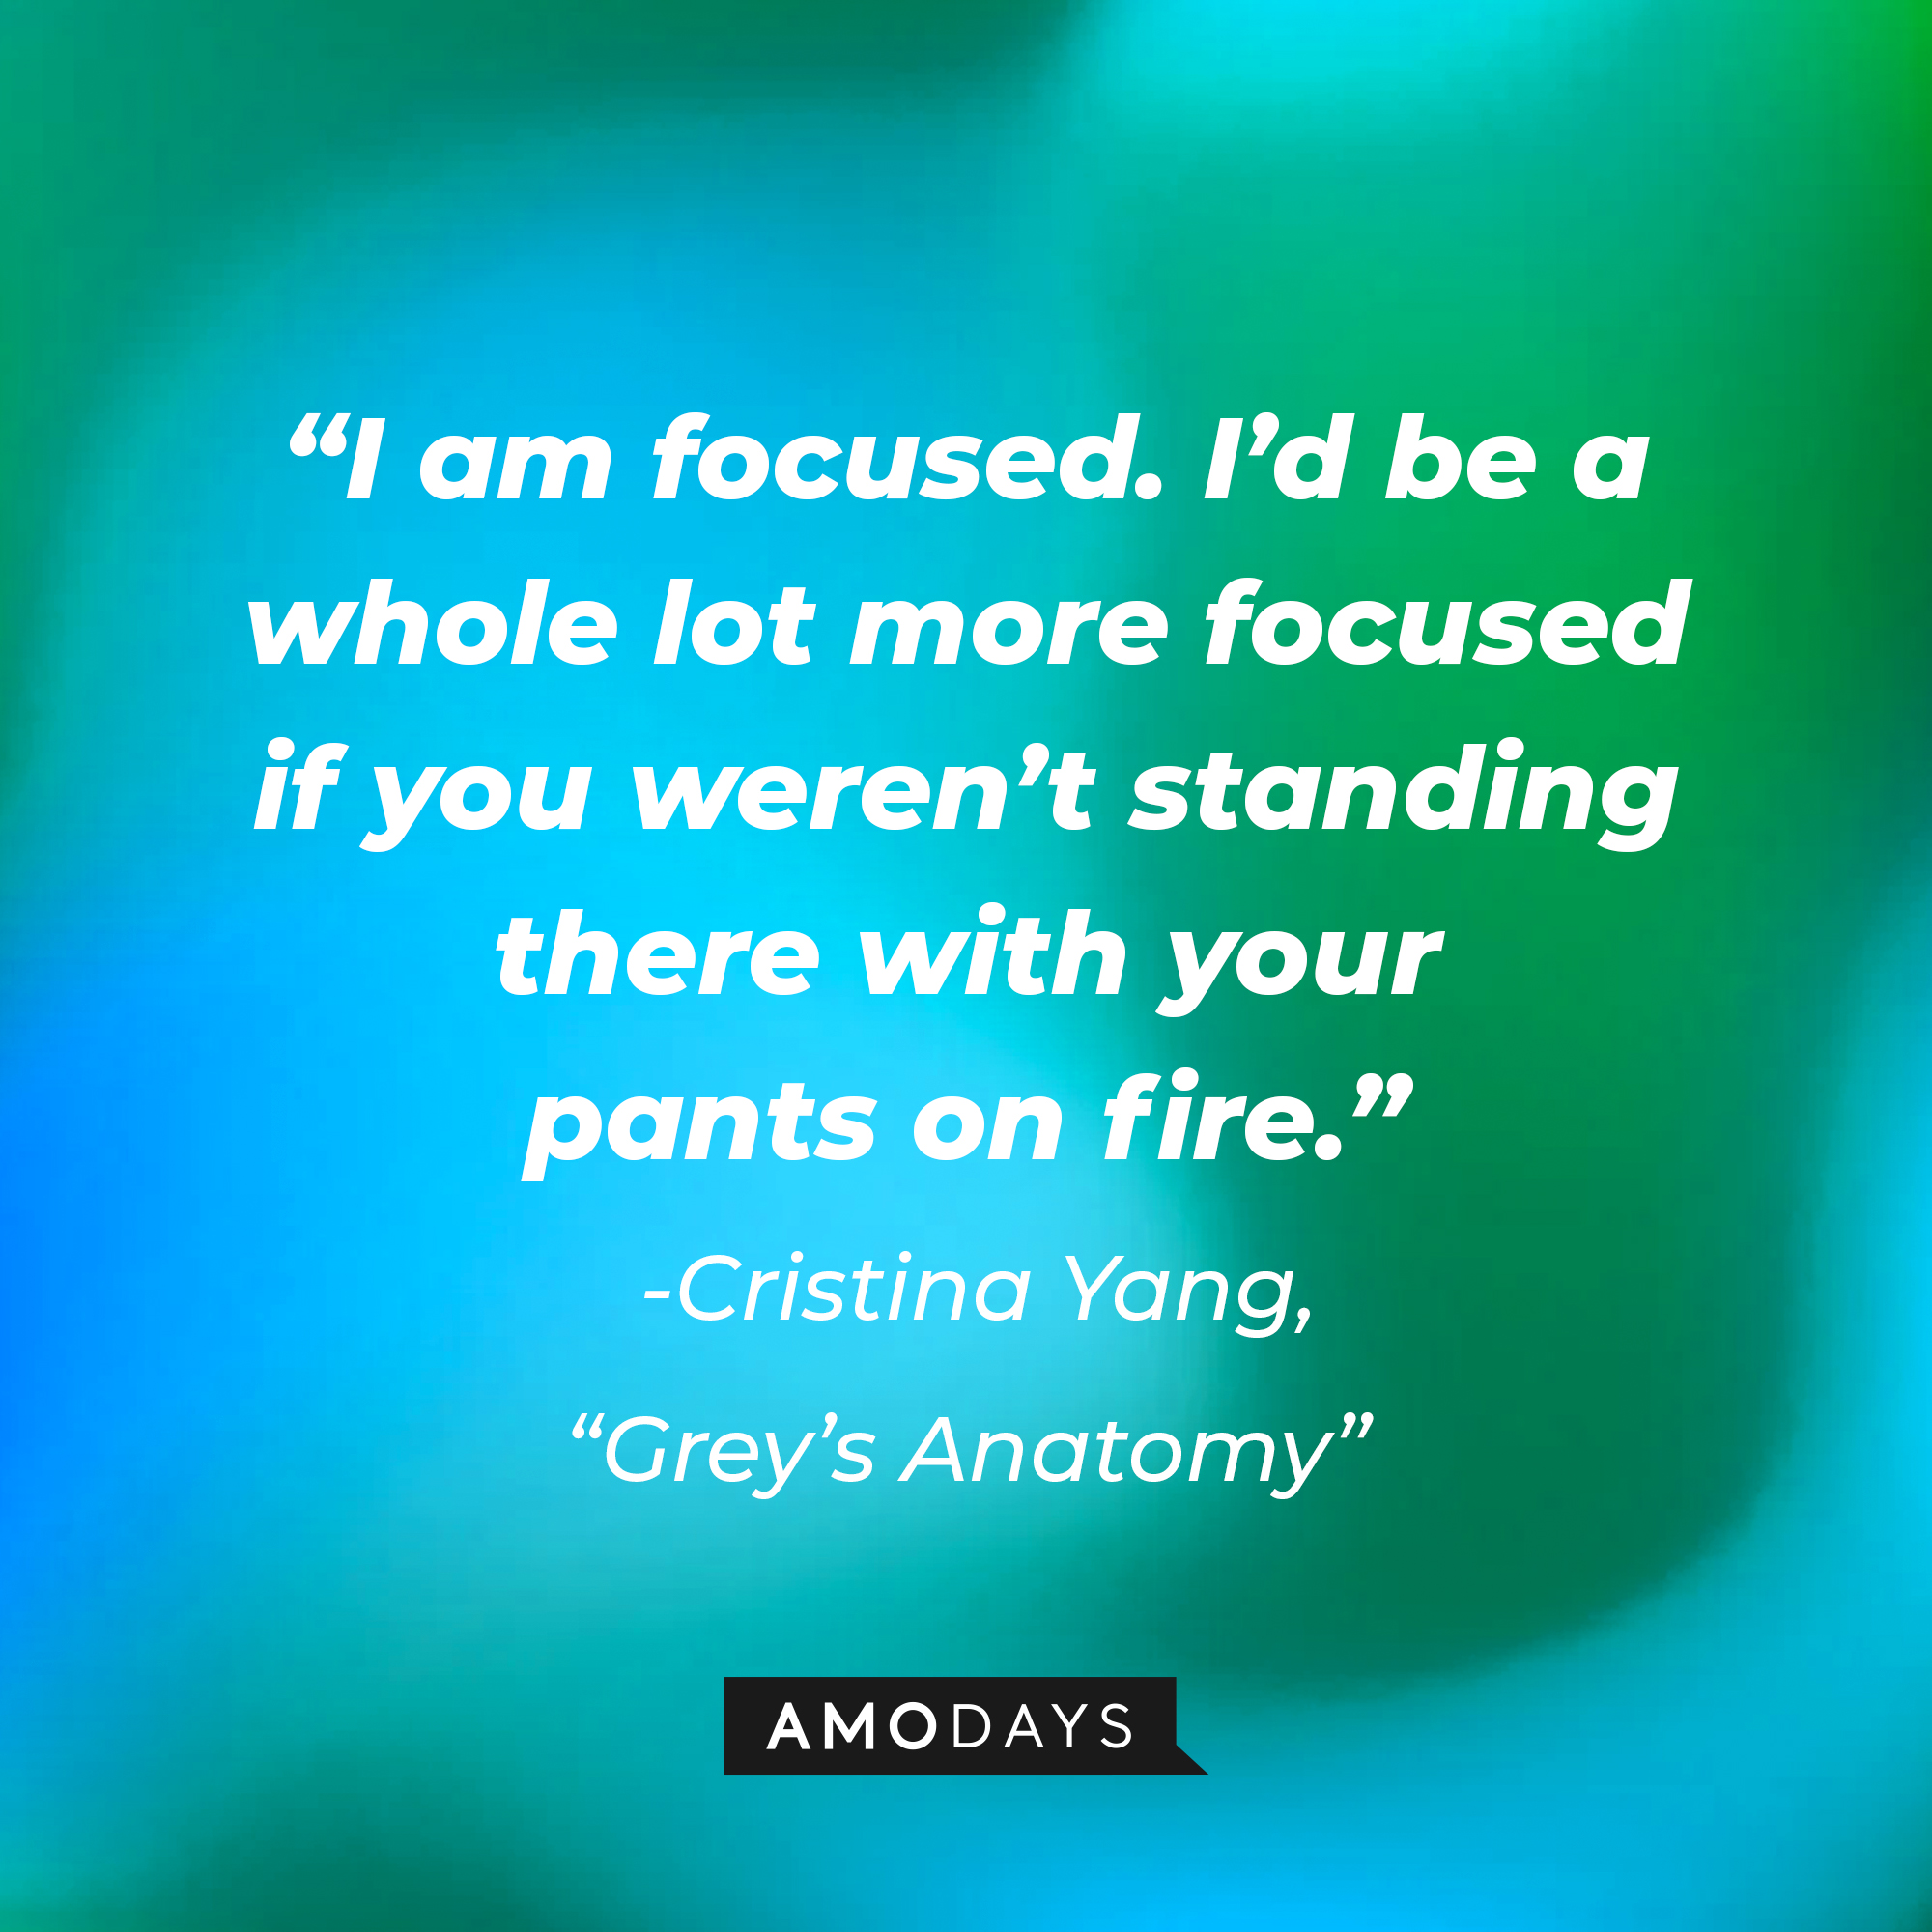 Cristina Yang's quote on "Grey's Anatomy:" “I am focused. I’d be a whole lot more focused if you weren’t standing there with your pants on fire.” | Source: AmoDays